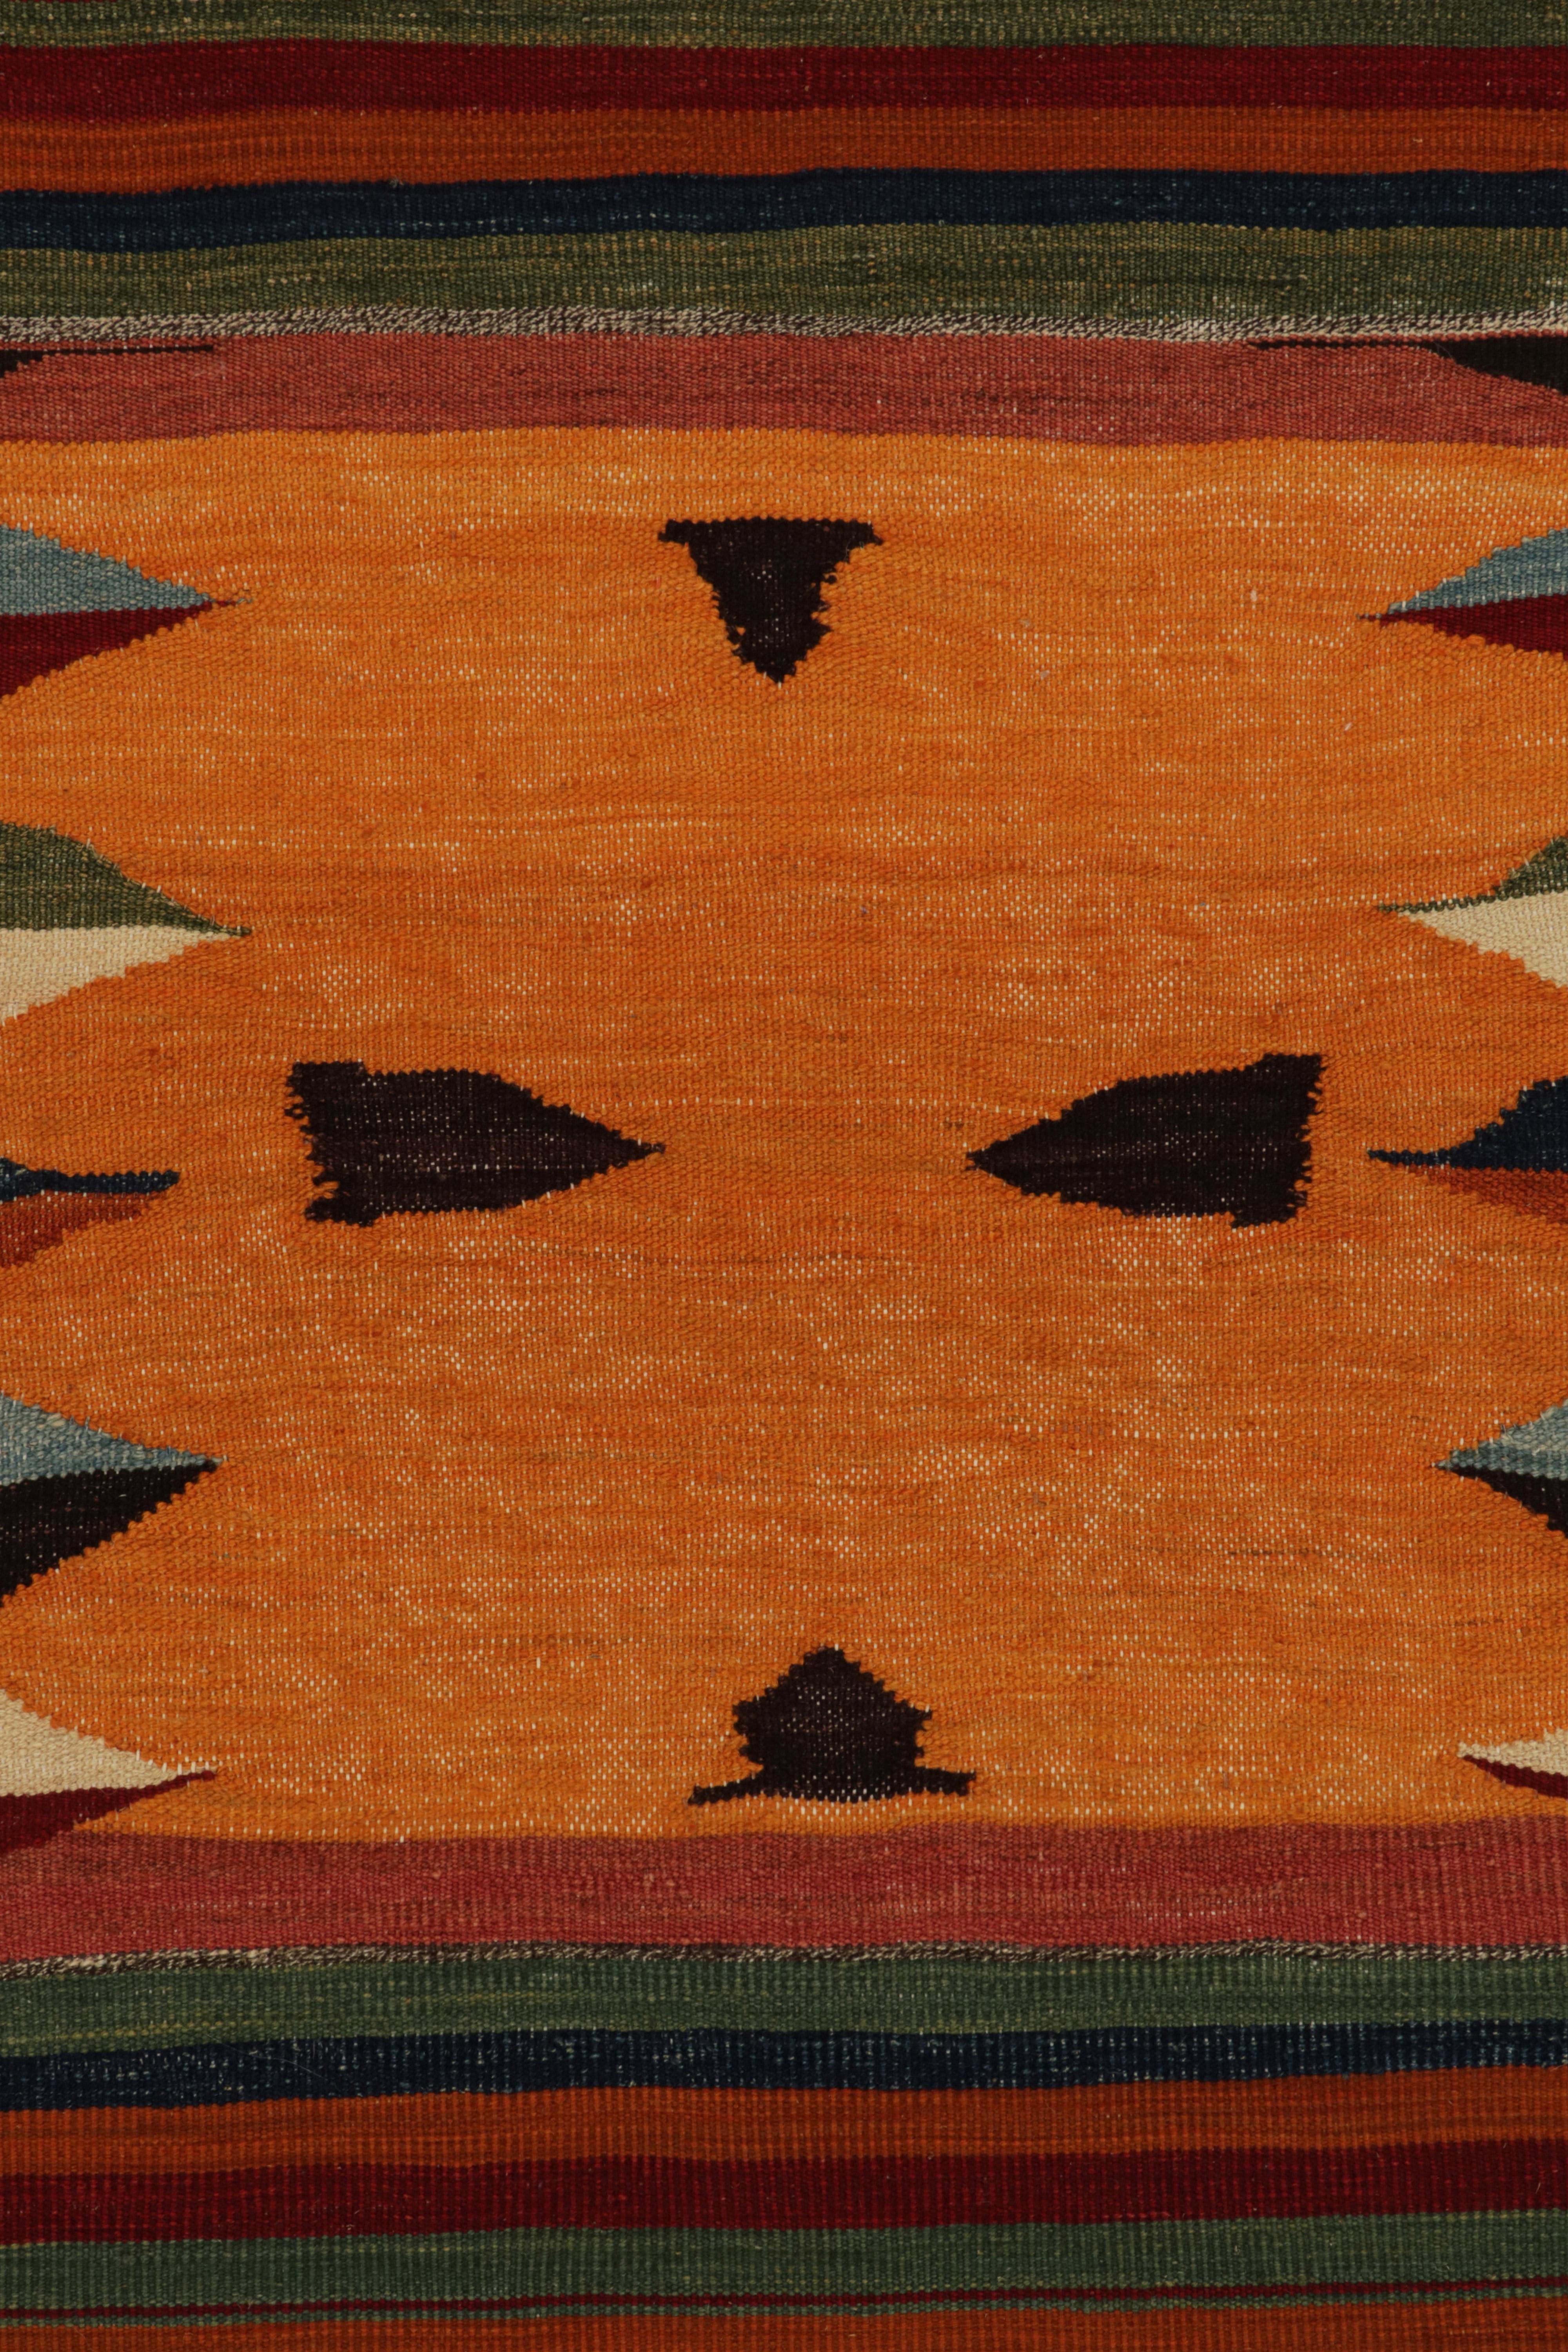 1980s Vintage Sofreh Kilim Rug in Orange Tribal Stripe Patterns by Rug & Kilim In Good Condition For Sale In Long Island City, NY